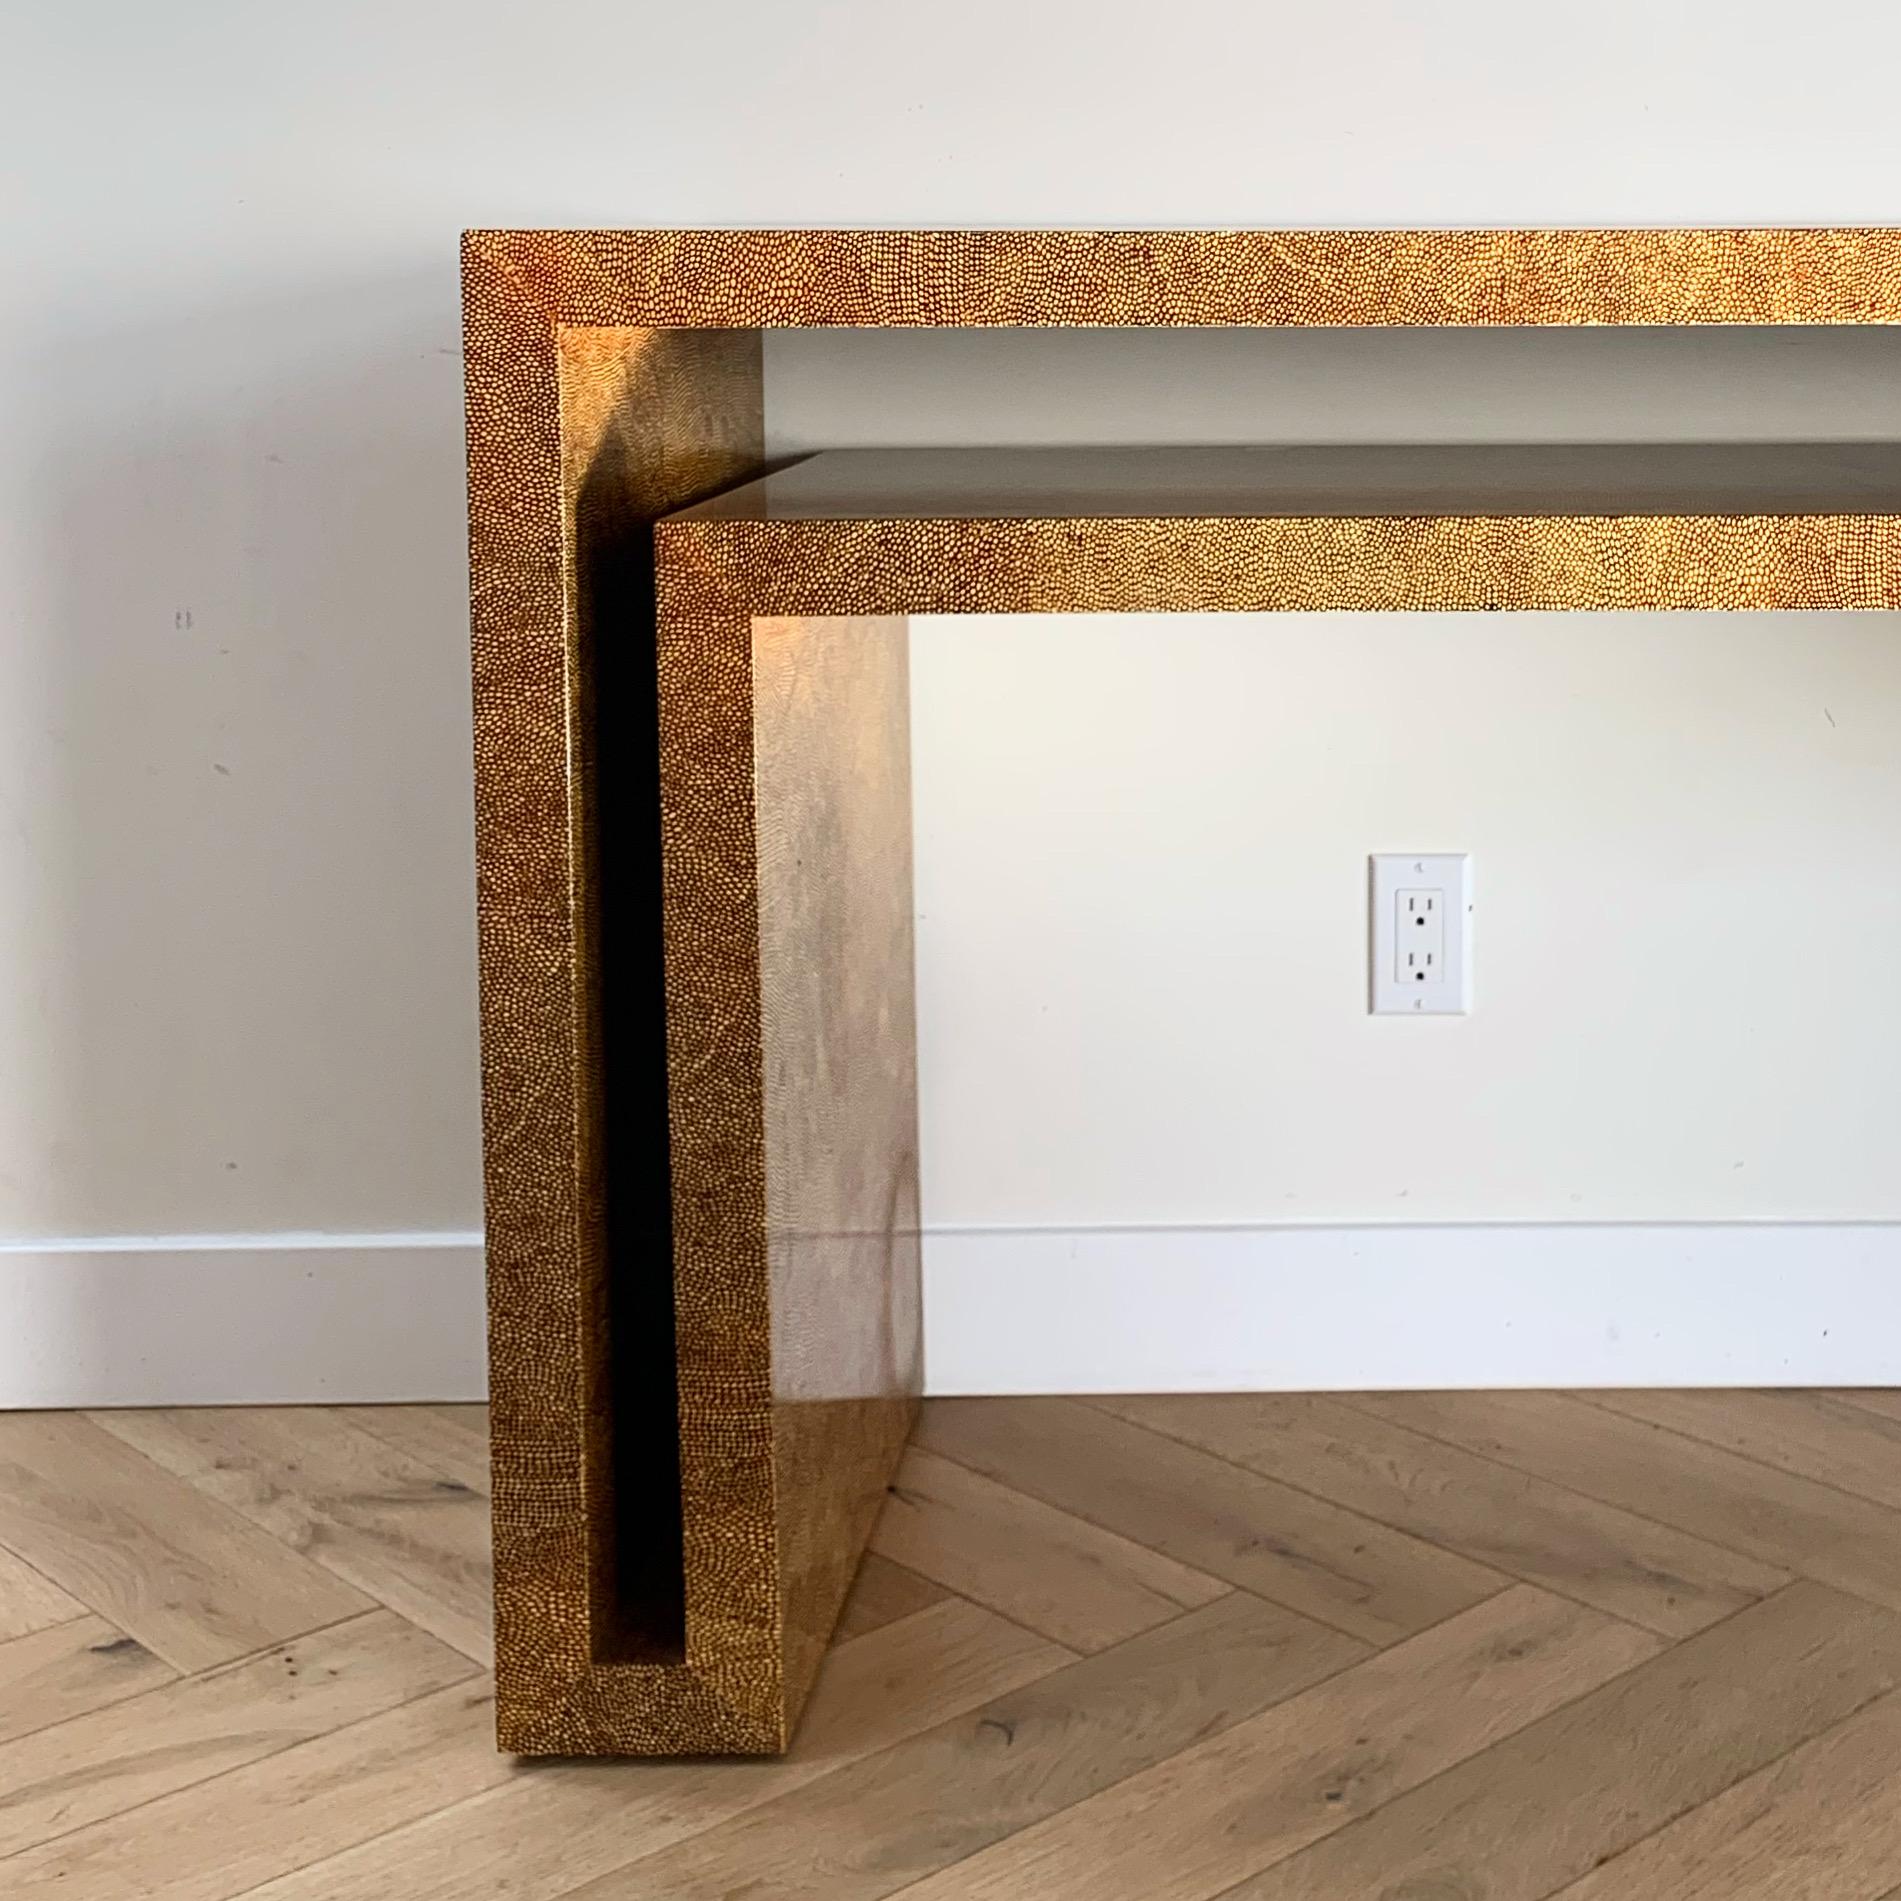 Faux shagreen geometric “cut out” console table circa early 1970s. Solid wood construction ie heavy. Finishing is vaguely reminiscent of leopard print. Could also function as a desk. Some edge wear (shown in pics in close up) but overall good